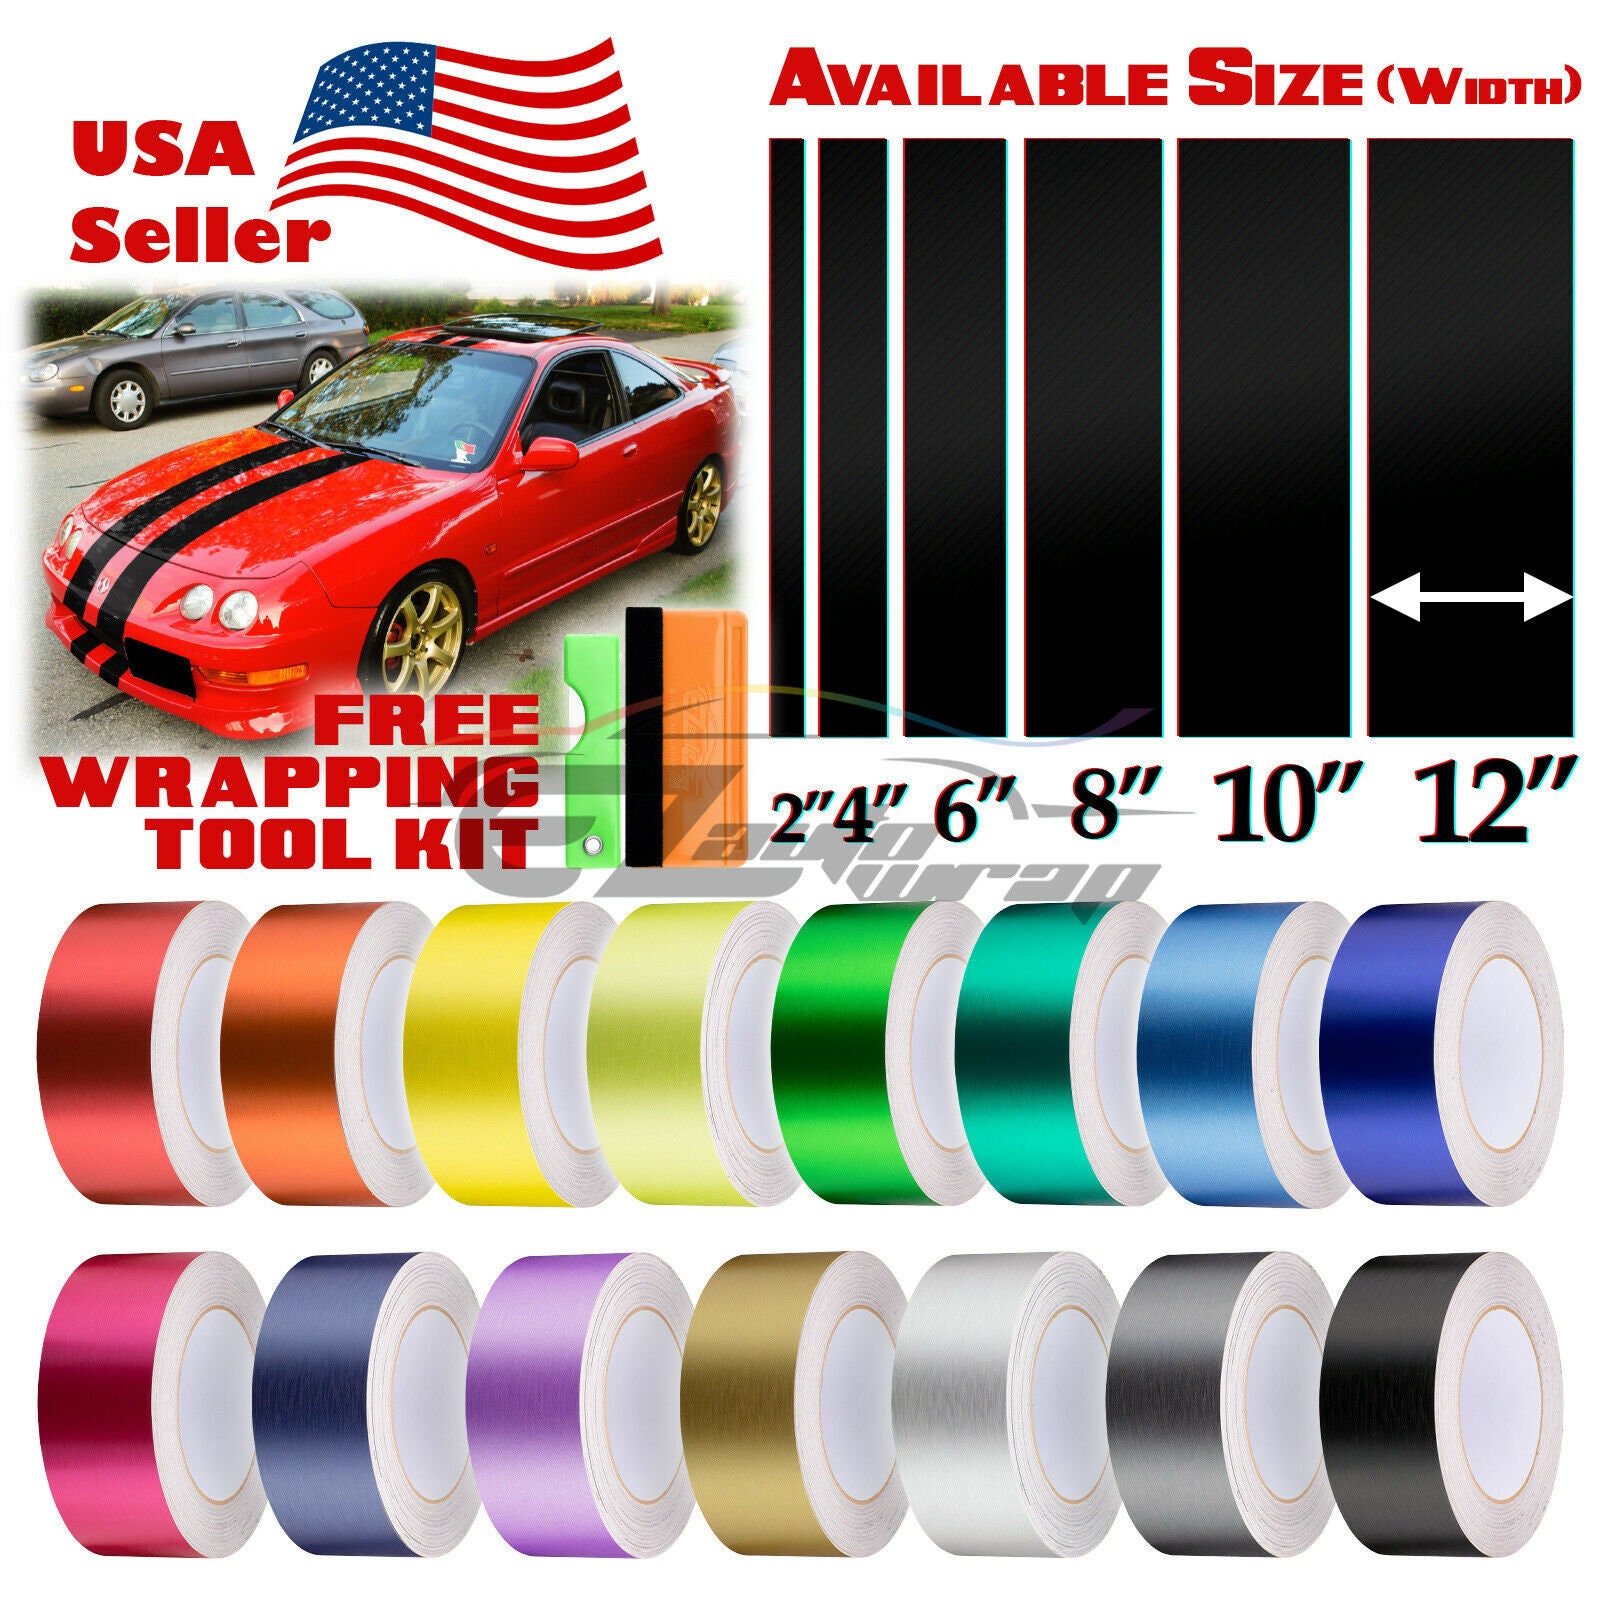 EZAUTOWRAP Brushed Aluminum Royal Purple Car Vinyl Wrap Vehicle Sticker  Decal Film Sheet With Air Release Technology Peel And Stick